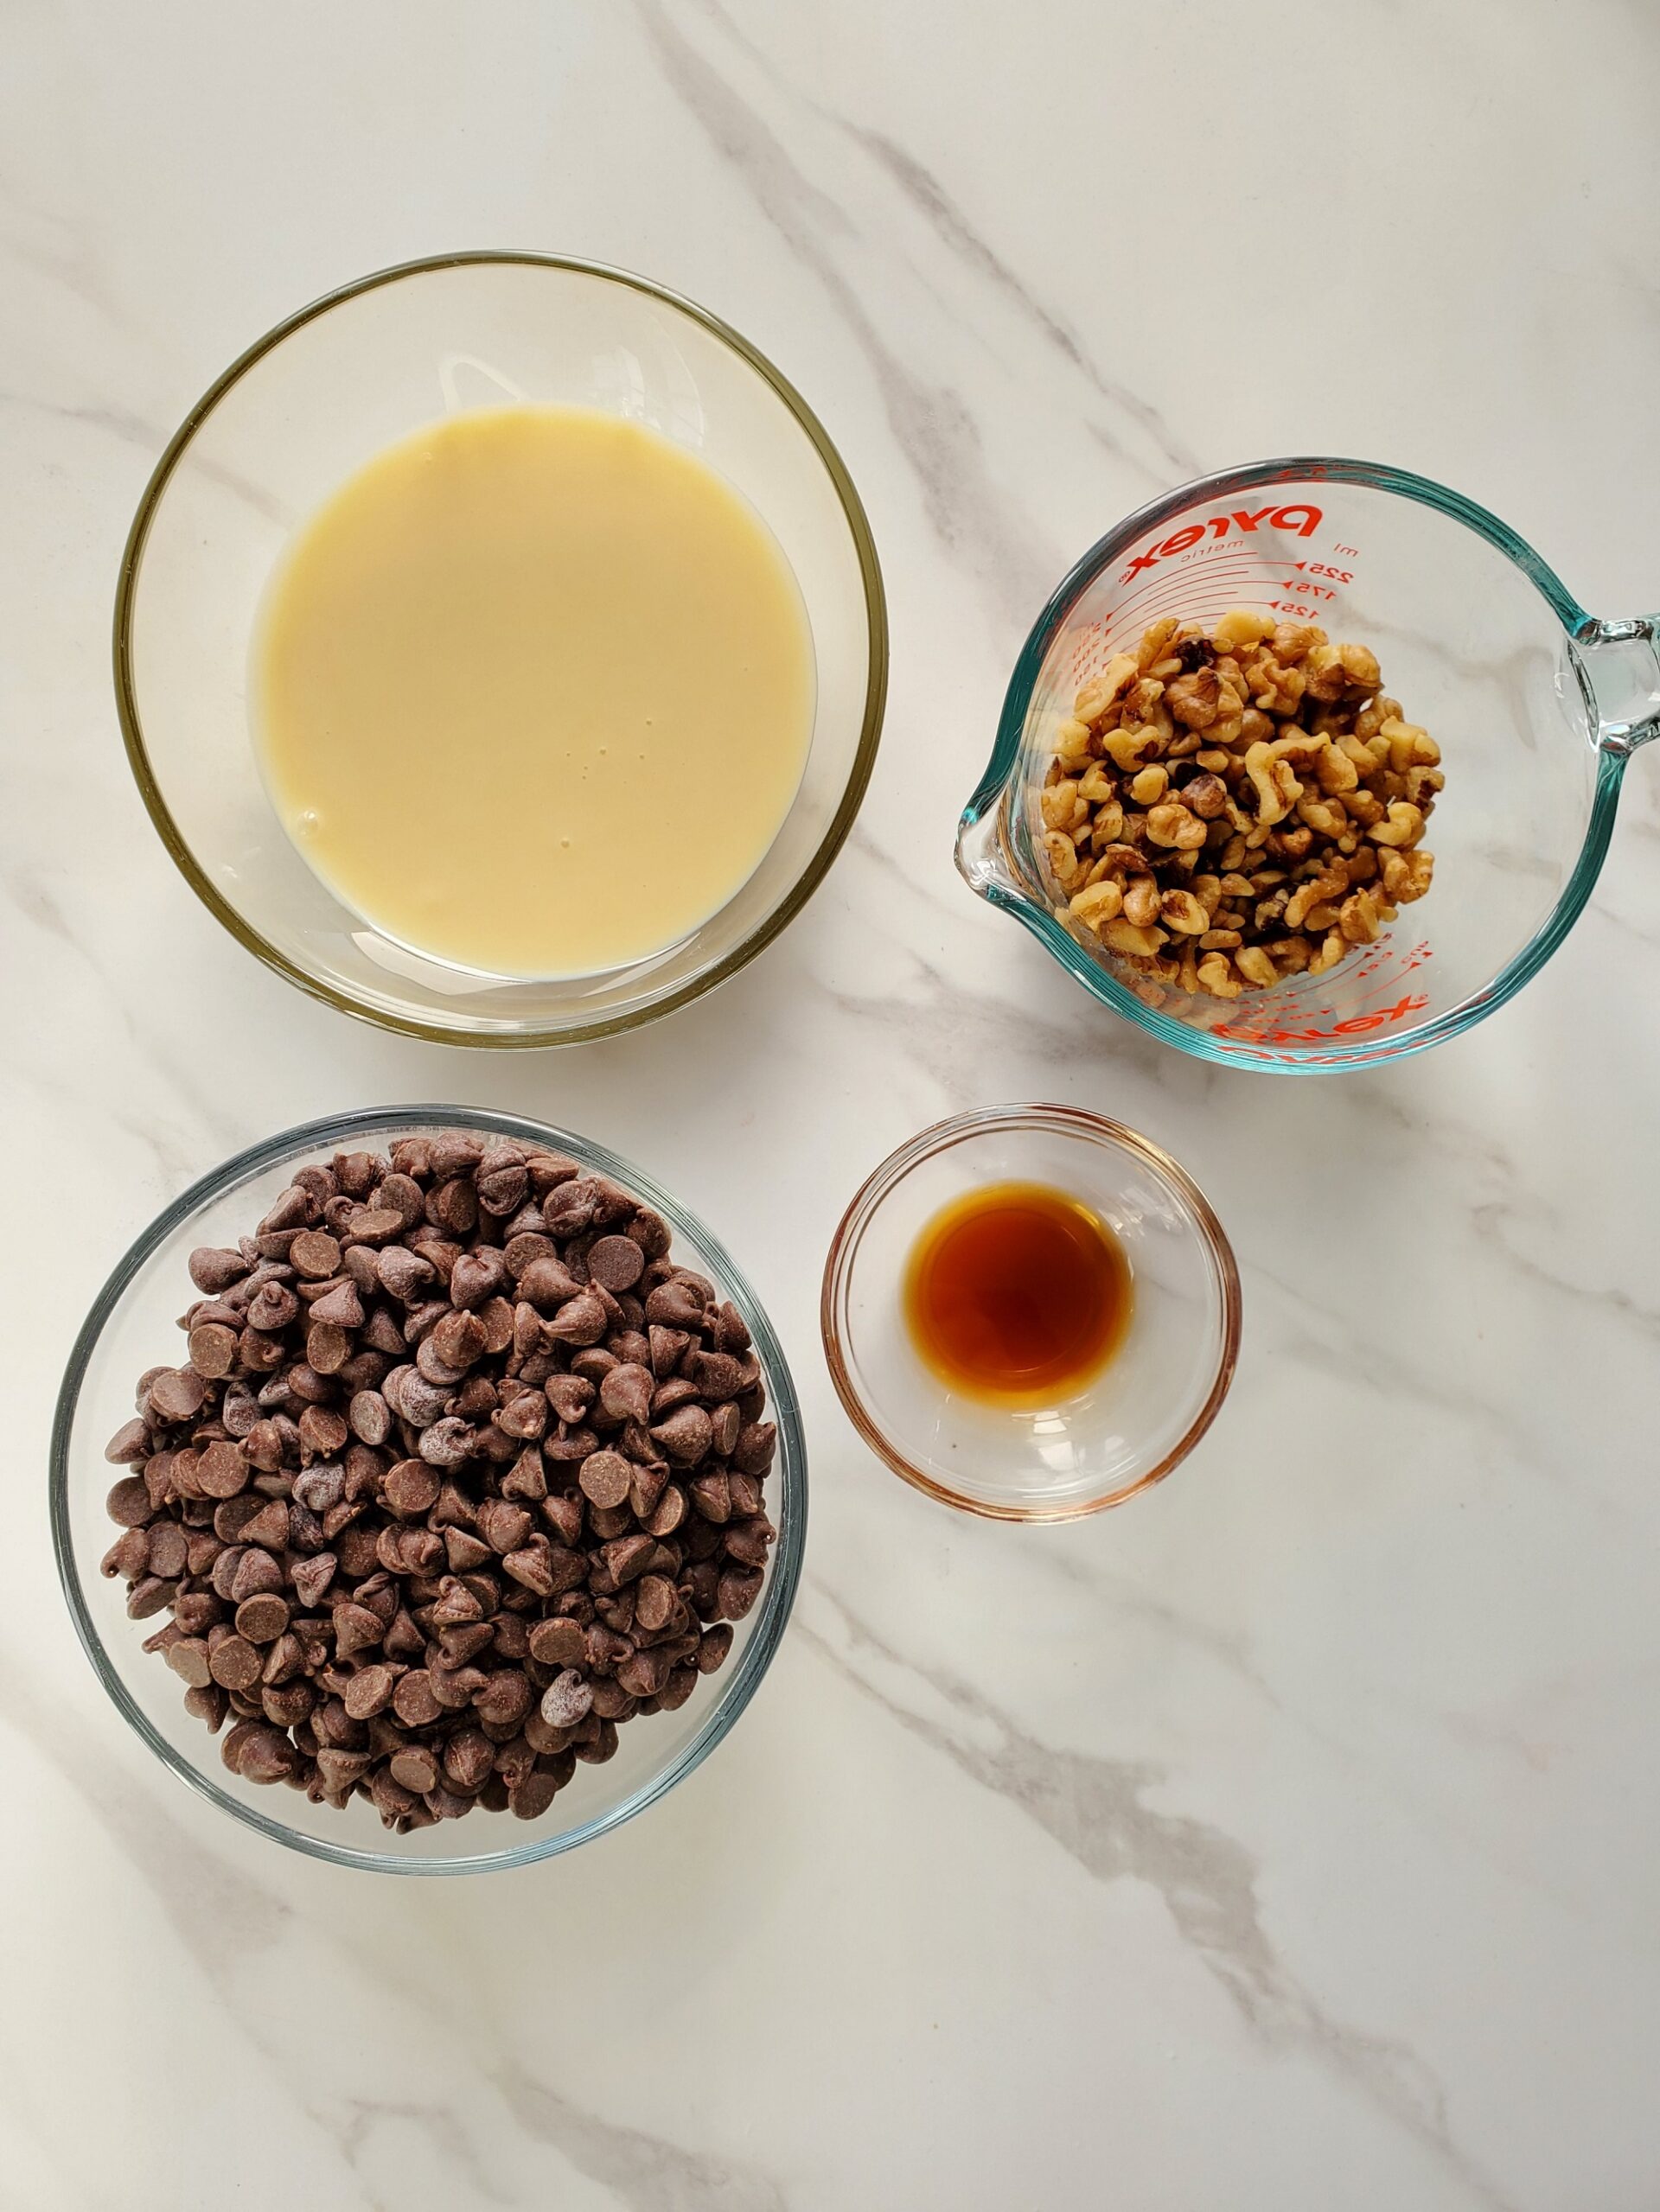 Ingredients for easy chocolate fudge on a counter.